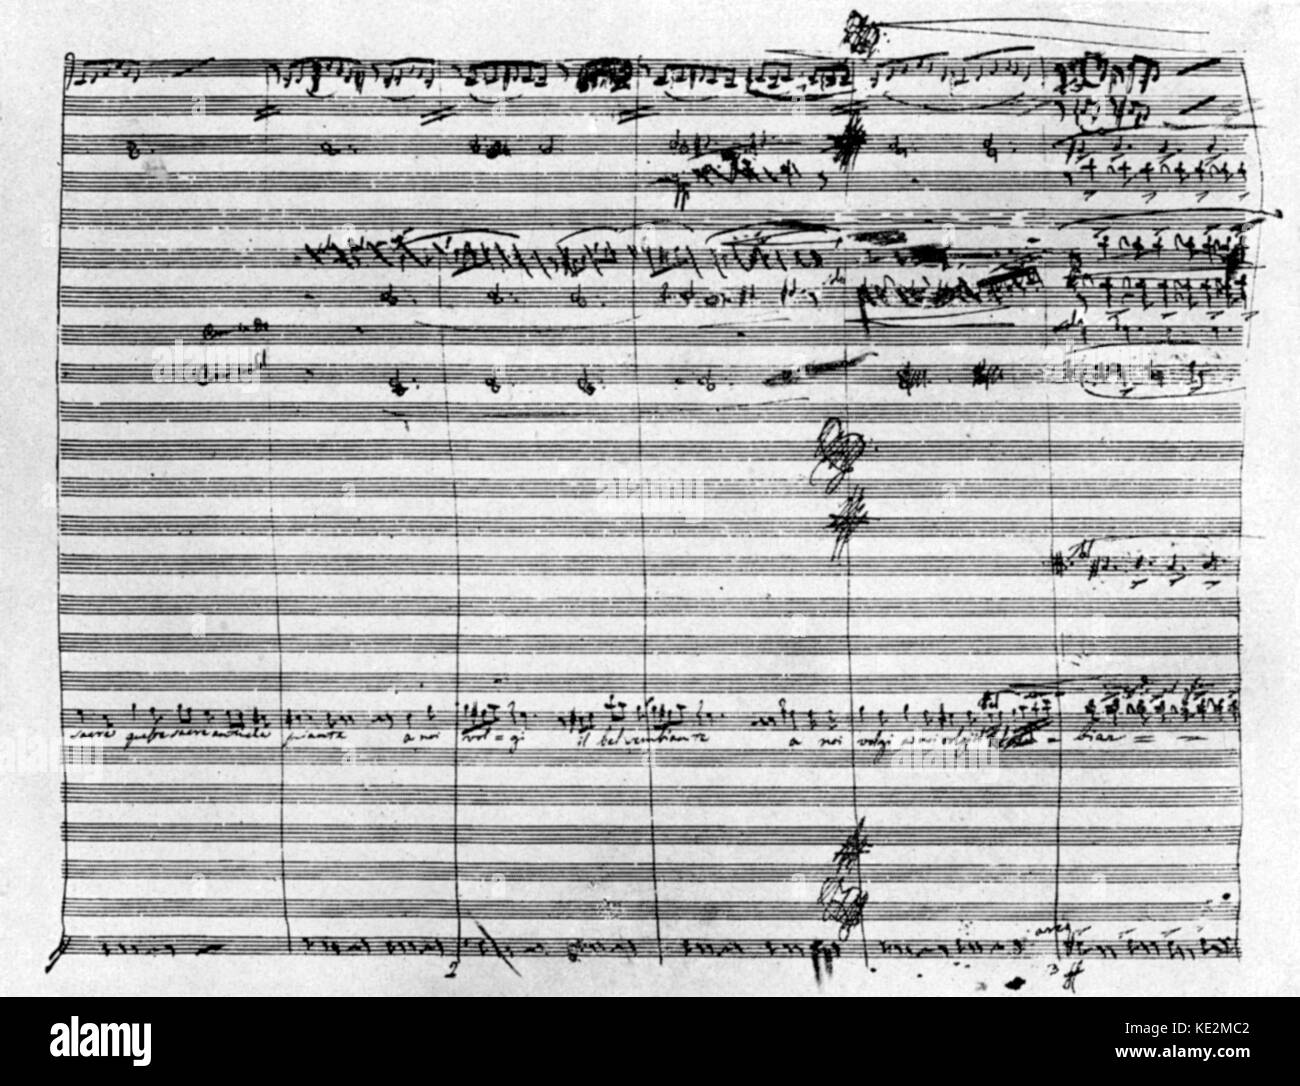 Vincenzo Bellini 's opera Norma - second page of the aria 'Casta diva…' in  the Italian composer 's handwriting, 3 November 1801 - 23 September 1835  Stock Photo - Alamy